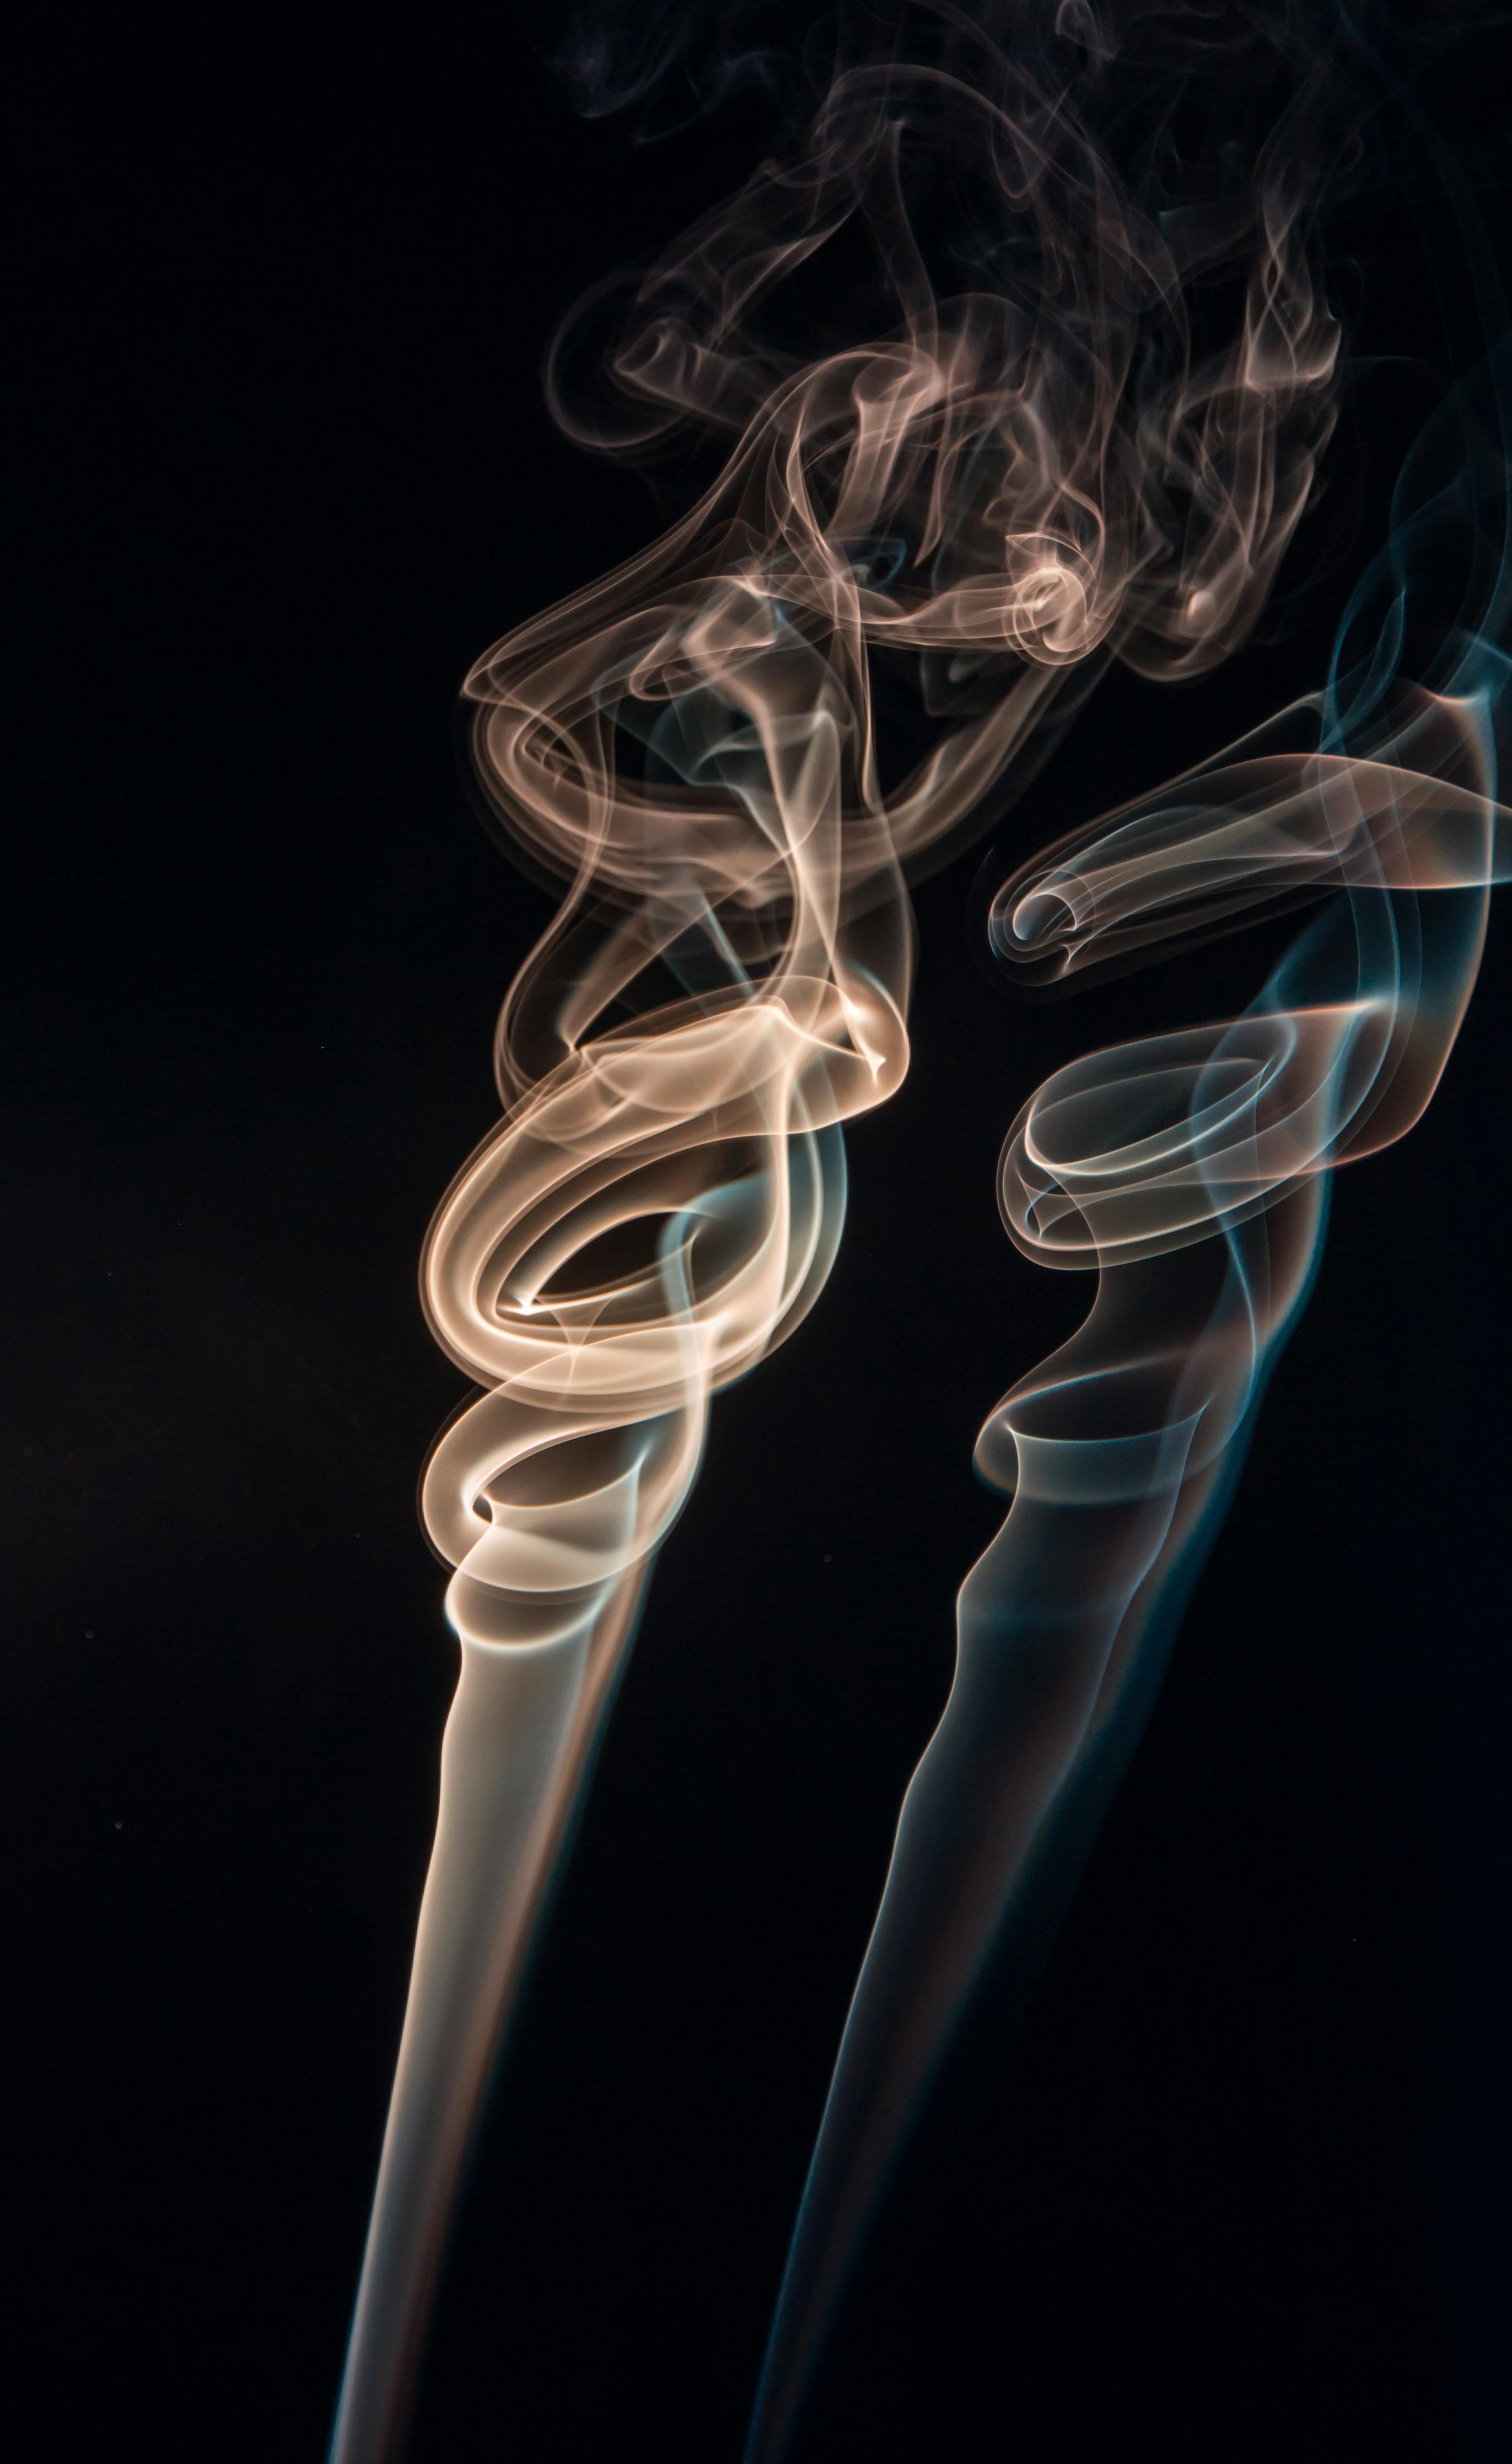 red smoke or steam on a black background for wallpapers and backgrounds  Stock Photo